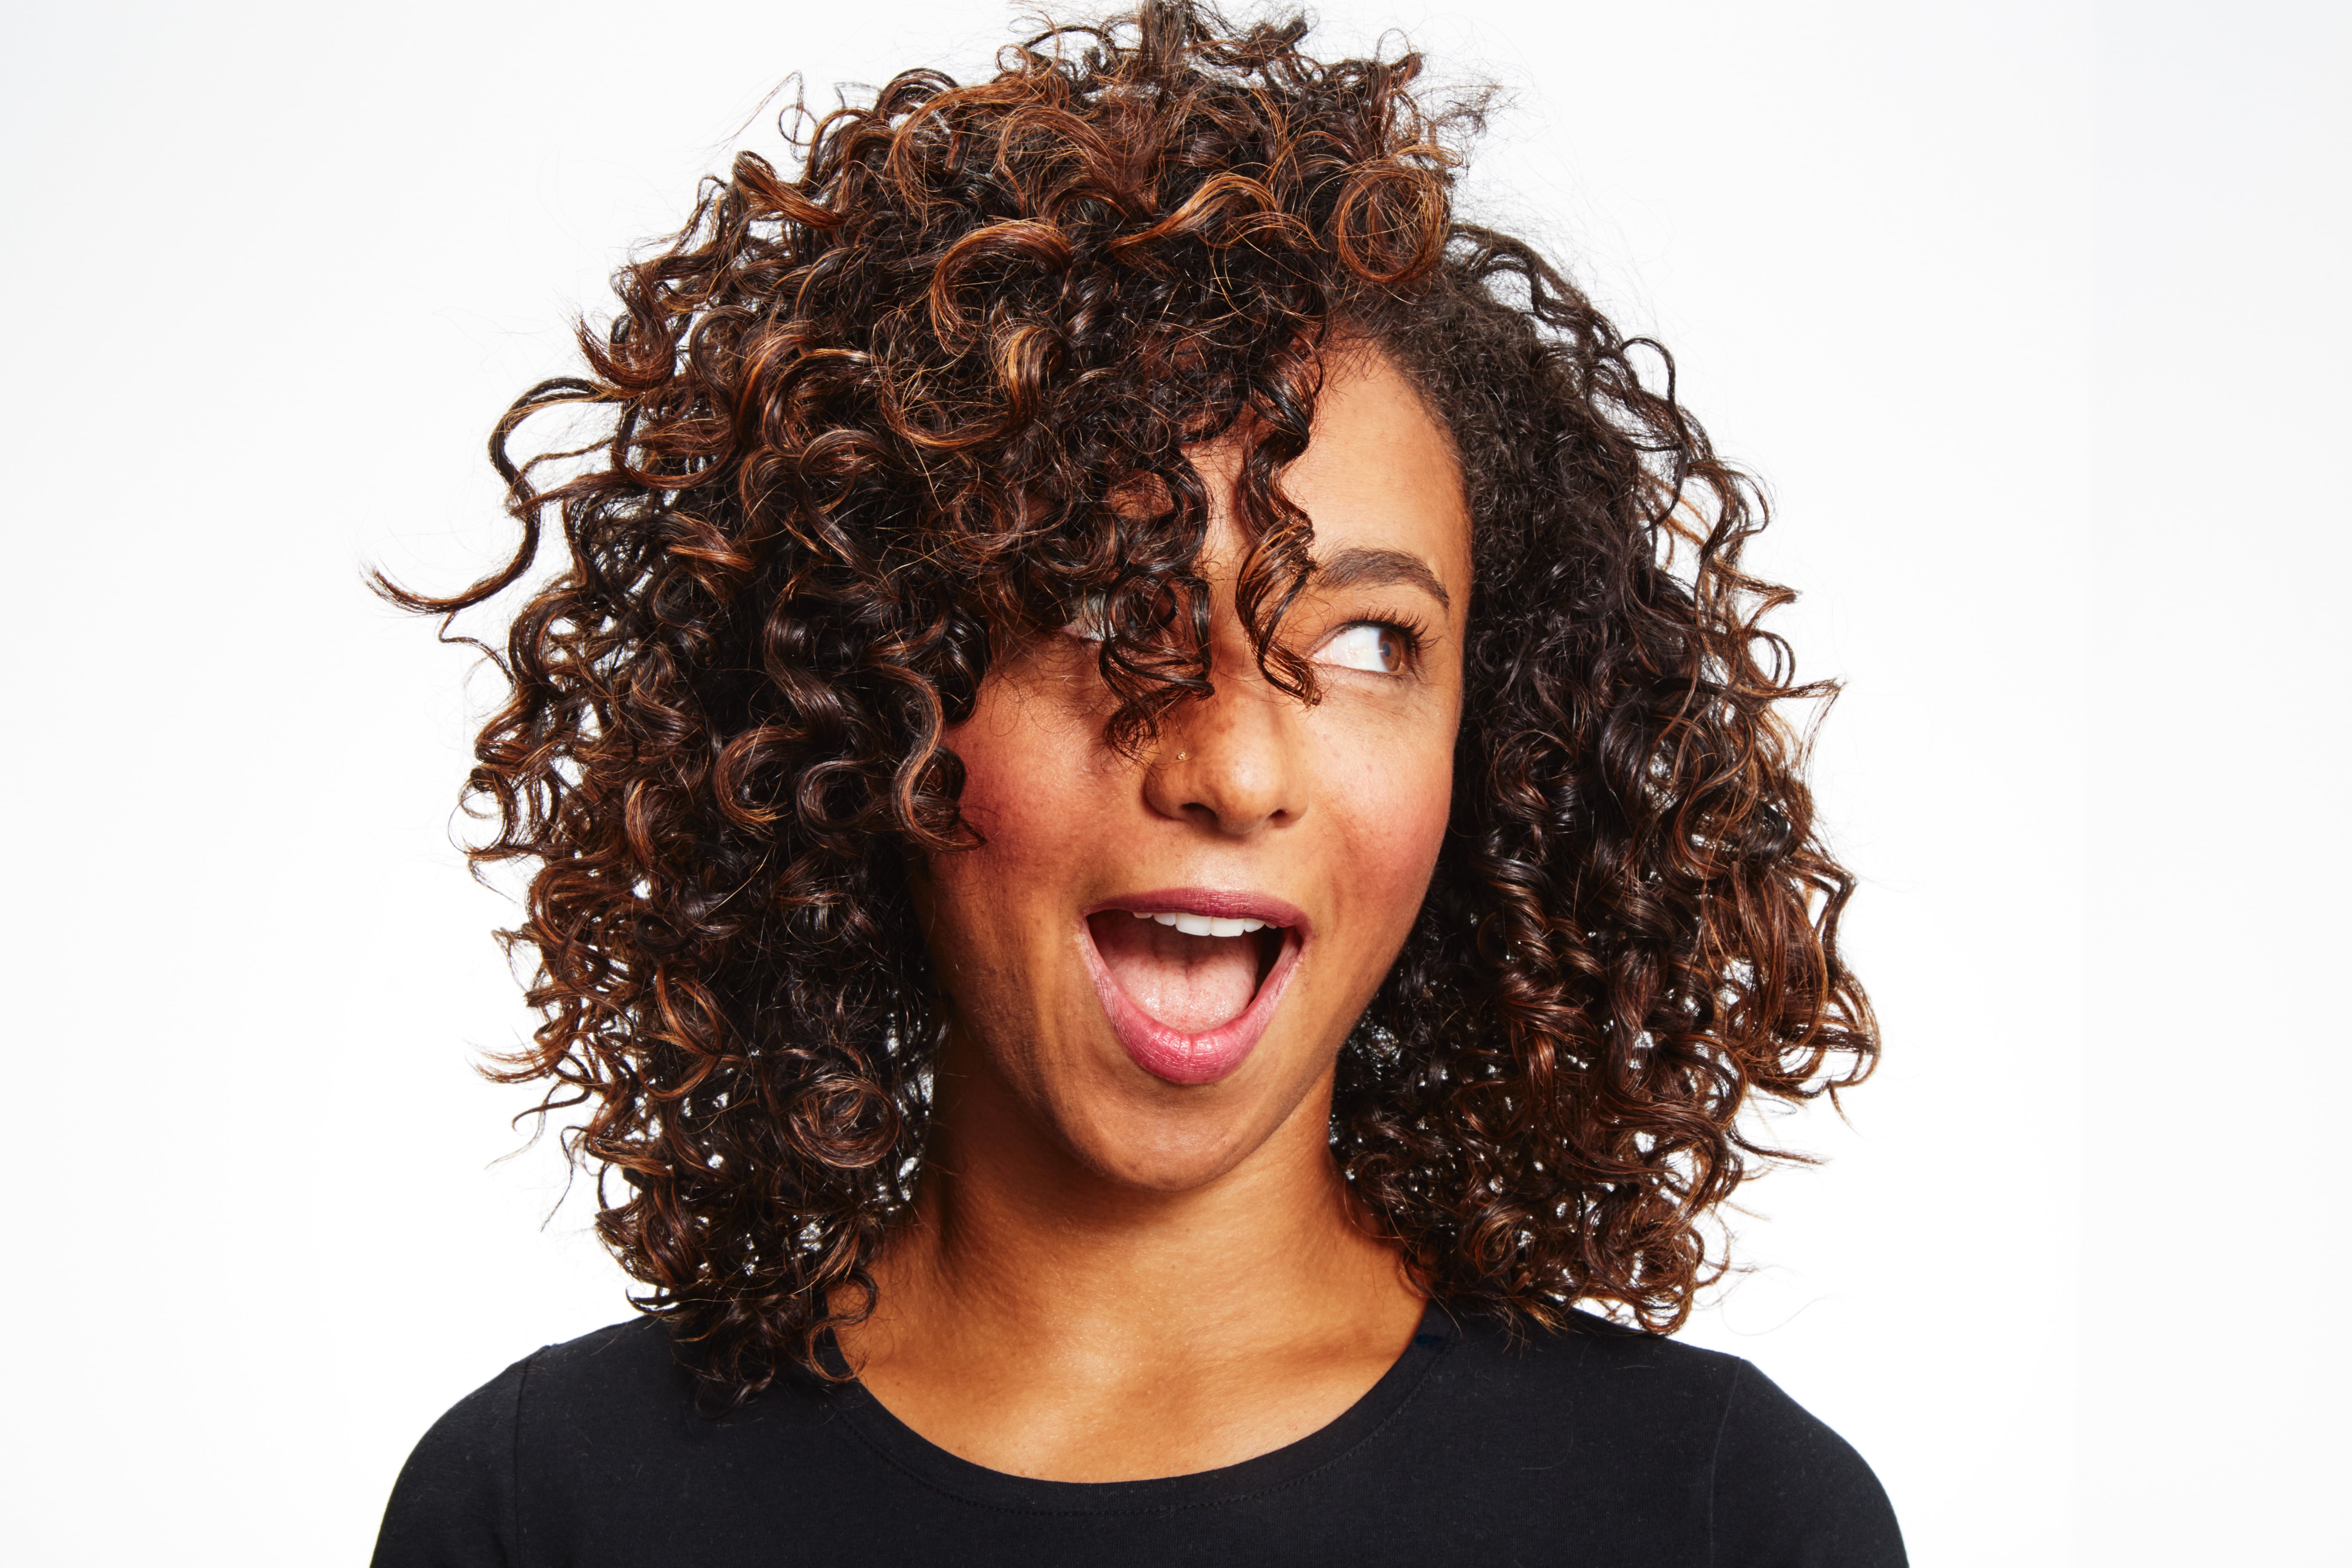 How to Style Curly Hair, According to a | POPSUGAR Beauty